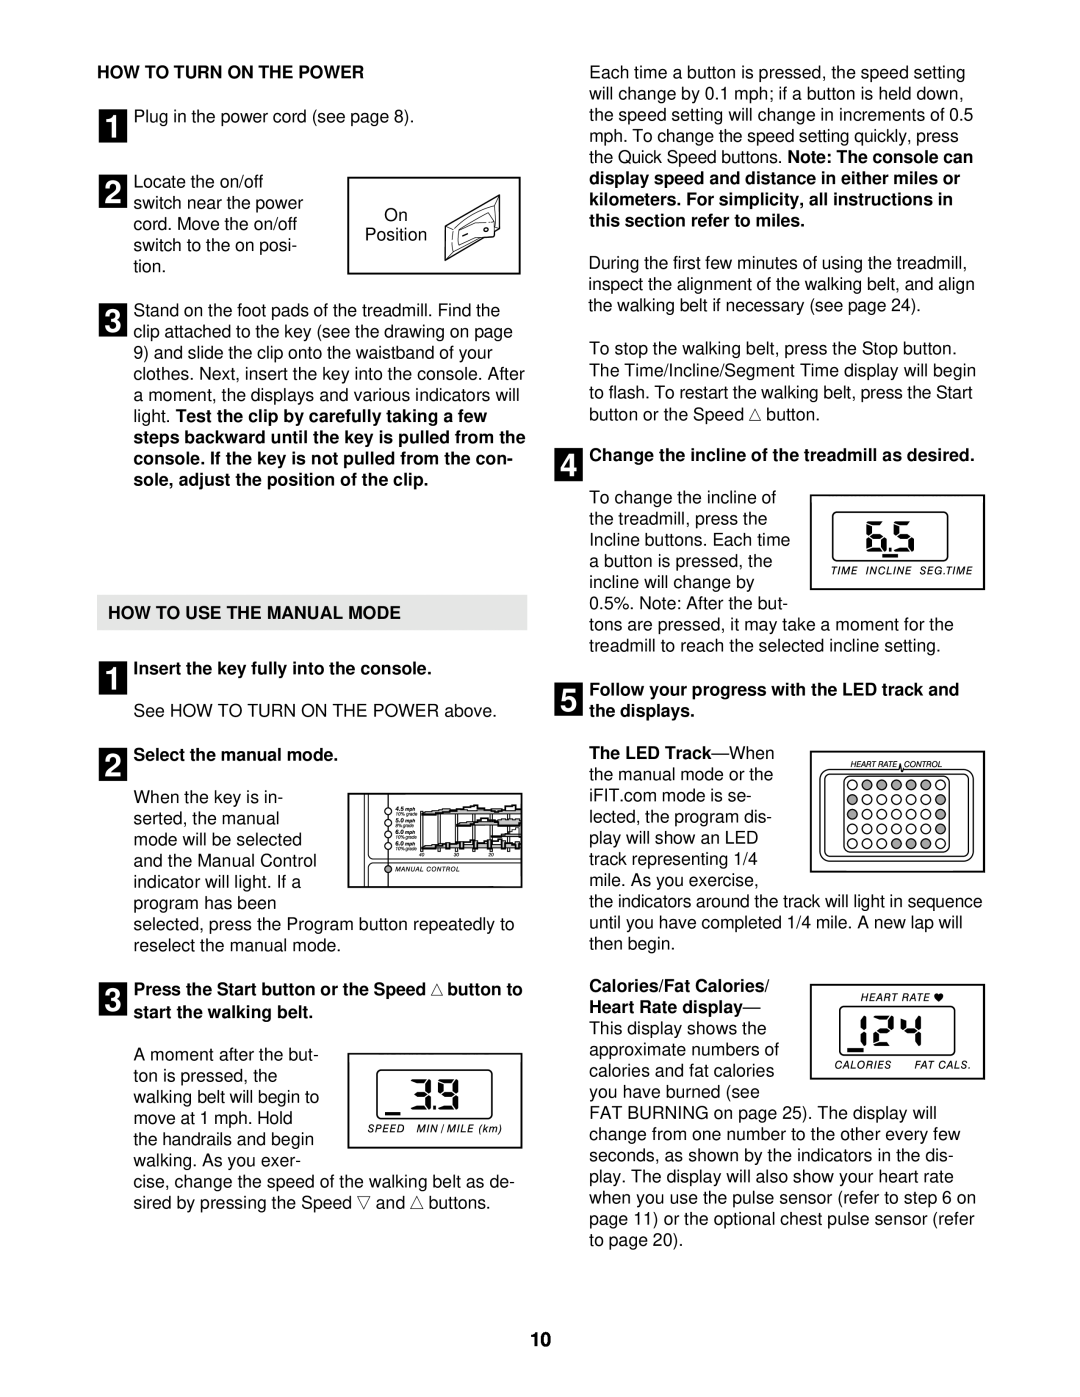 ProForm PFTL69211 user manual How To Turn On The Power, HOW TO USE THE MANUAL MODE 1 Insert the key fully into the console 